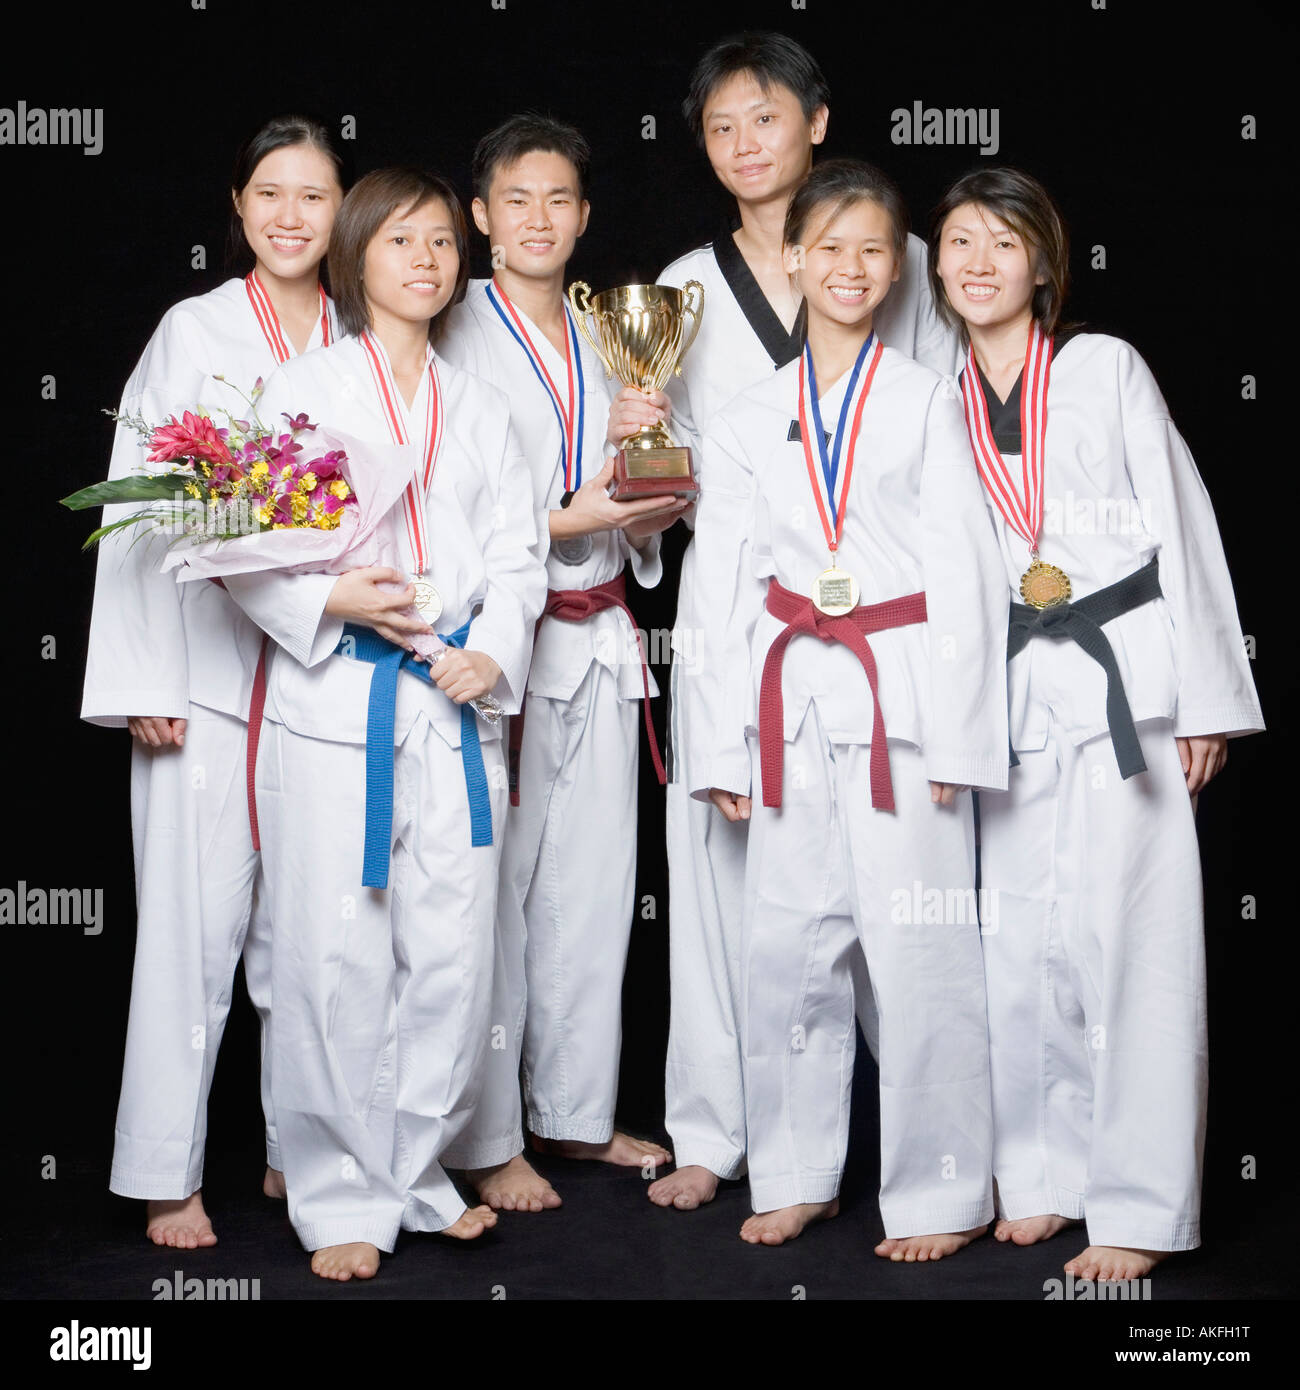 Group of martial arts players standing with their medals and trophies Stock Photo